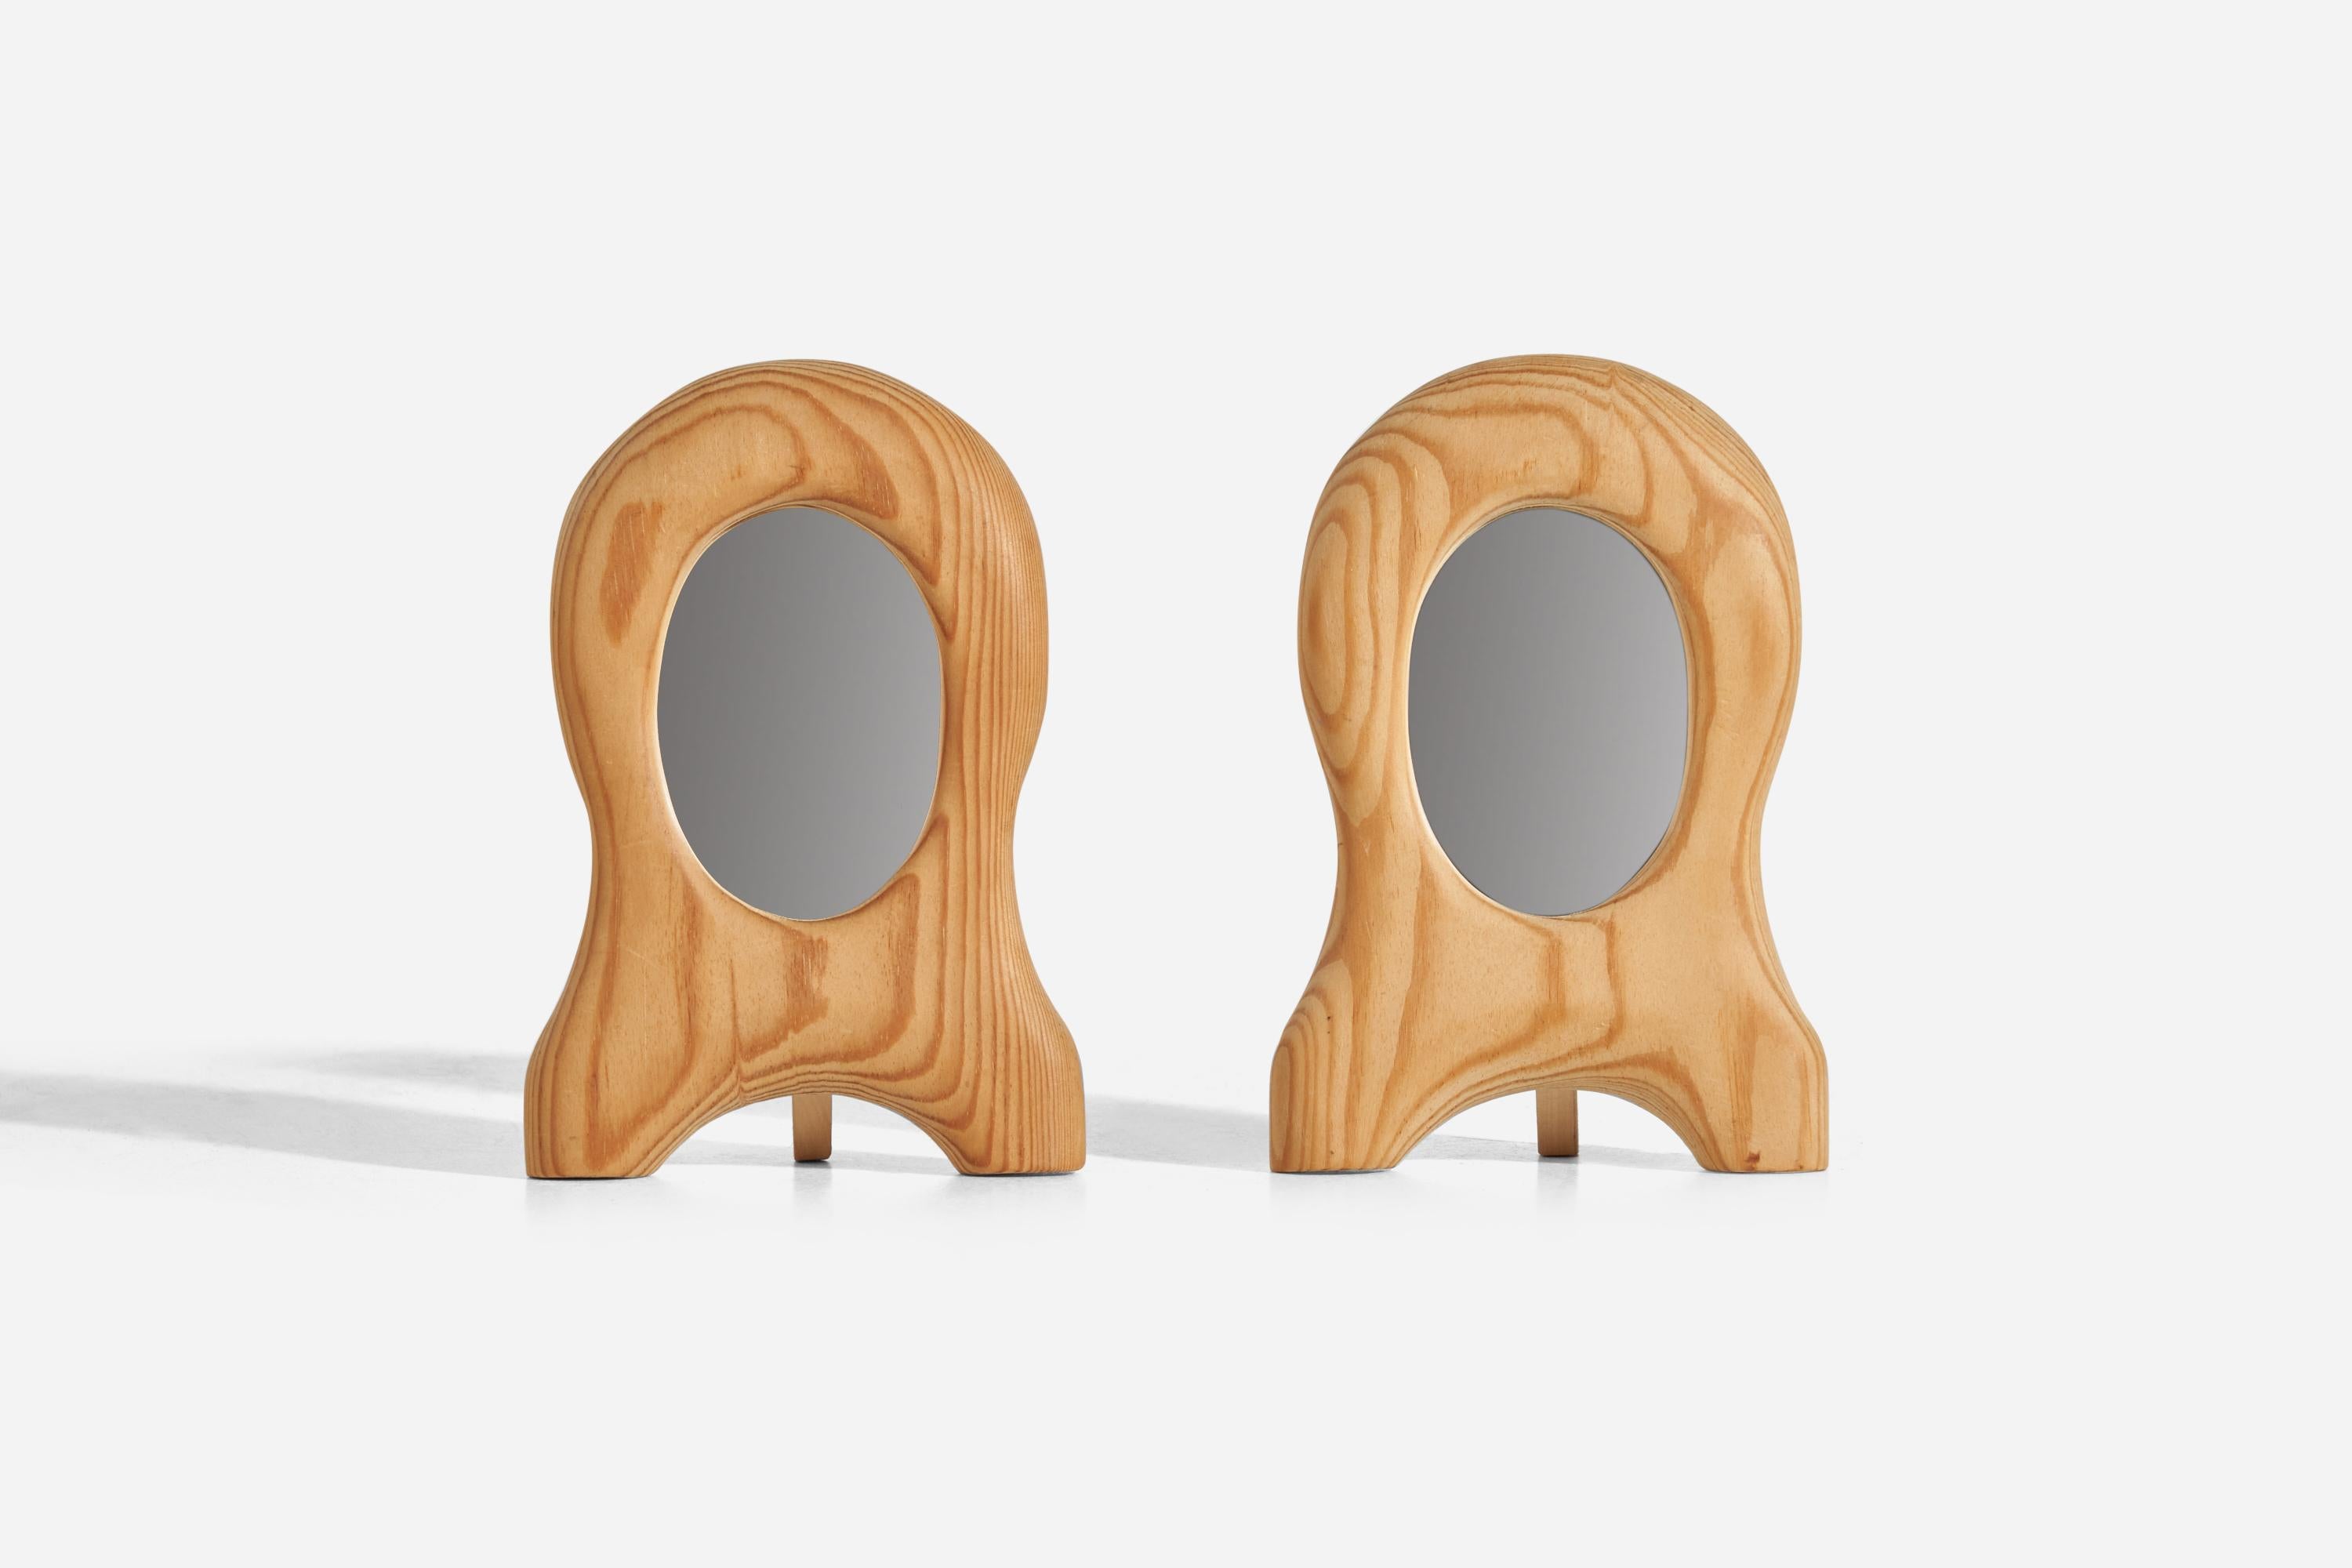 A pair of pine table mirrors designed and produced in Sweden, 1960s.